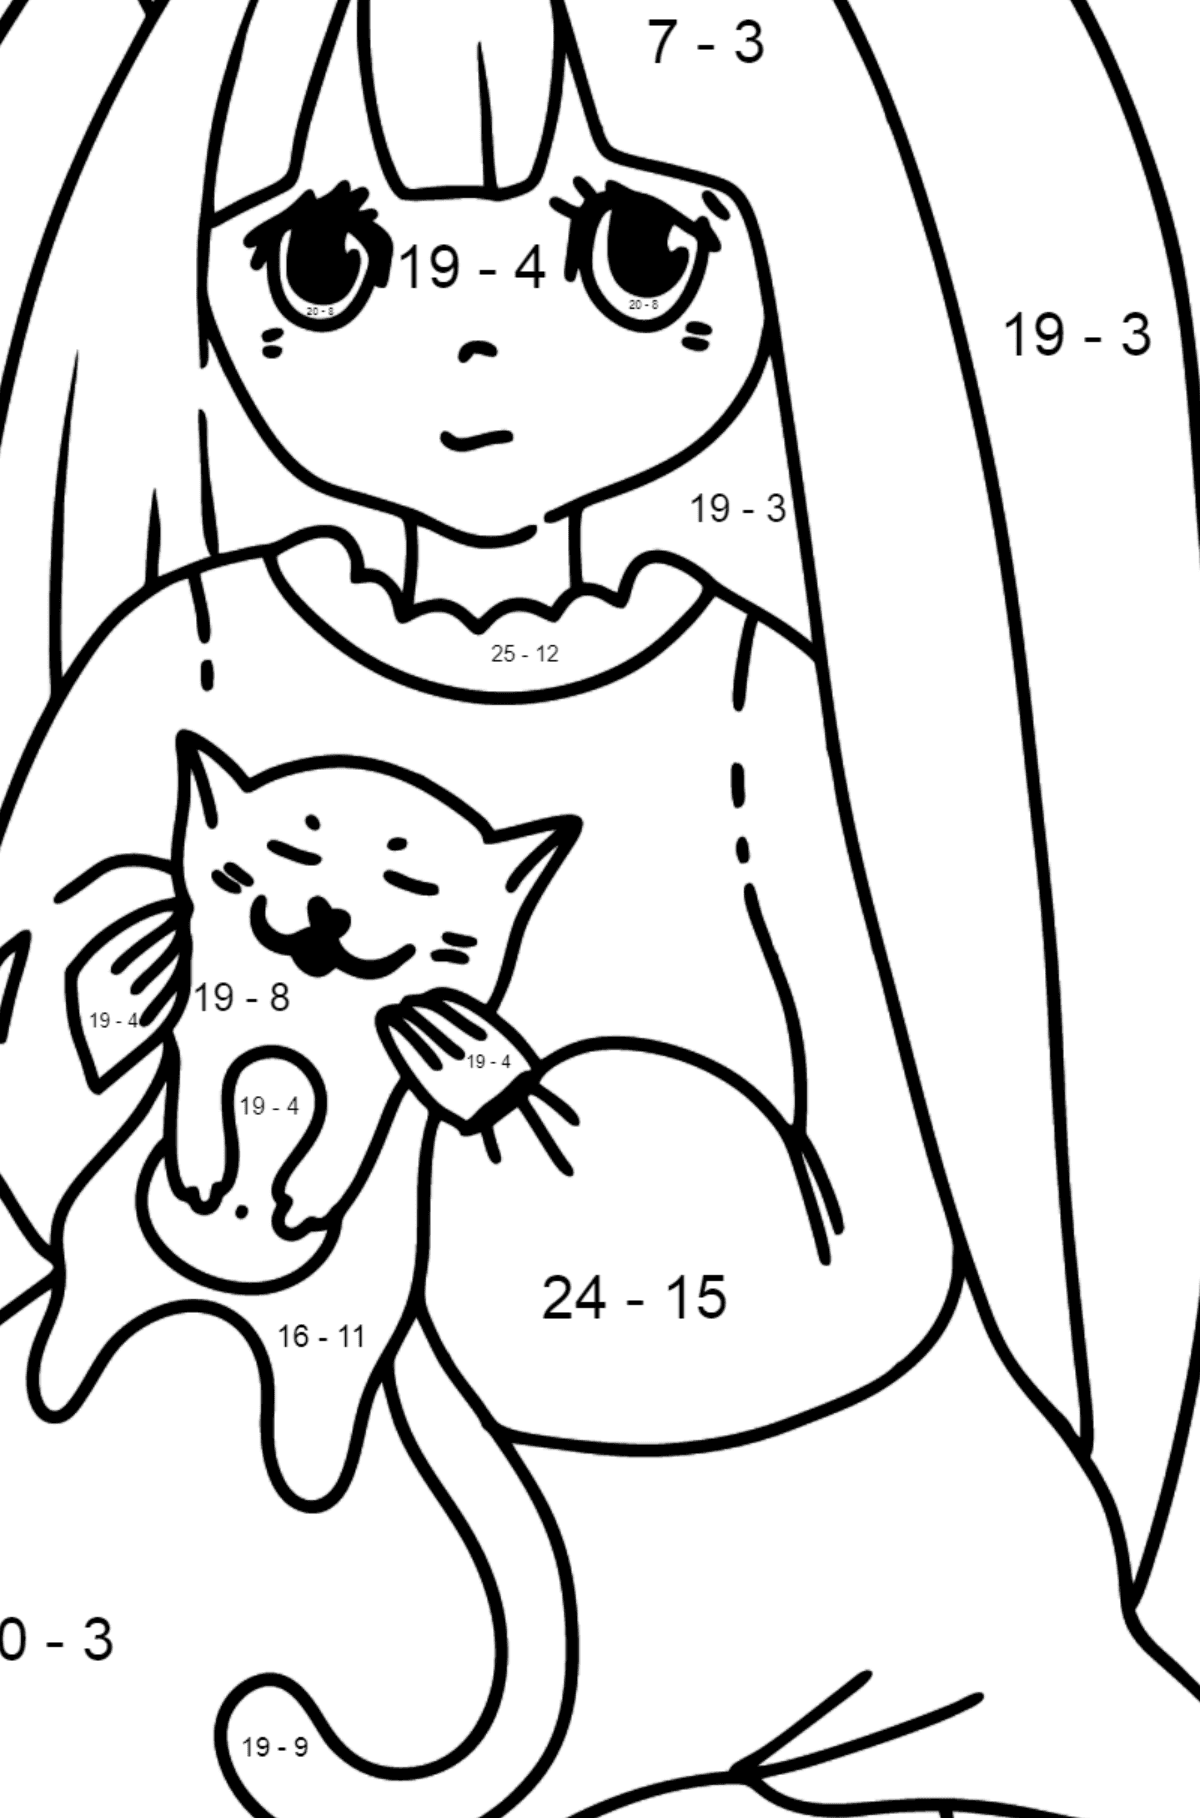 Anime Girl Playing with Kitten coloring page - Math Coloring - Subtraction for Kids